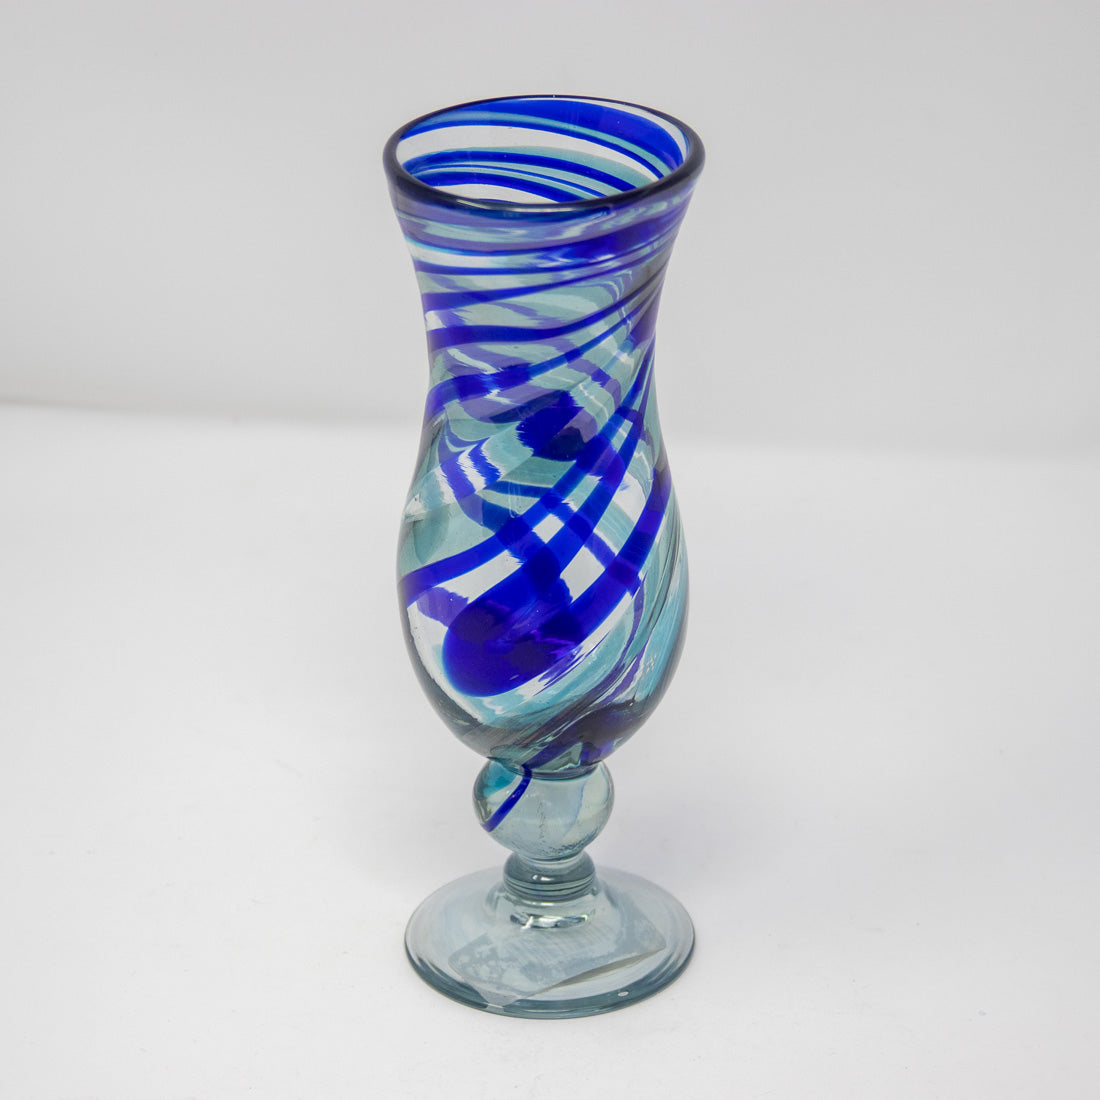 Pina colada glass with a blue swirl design viewed from above